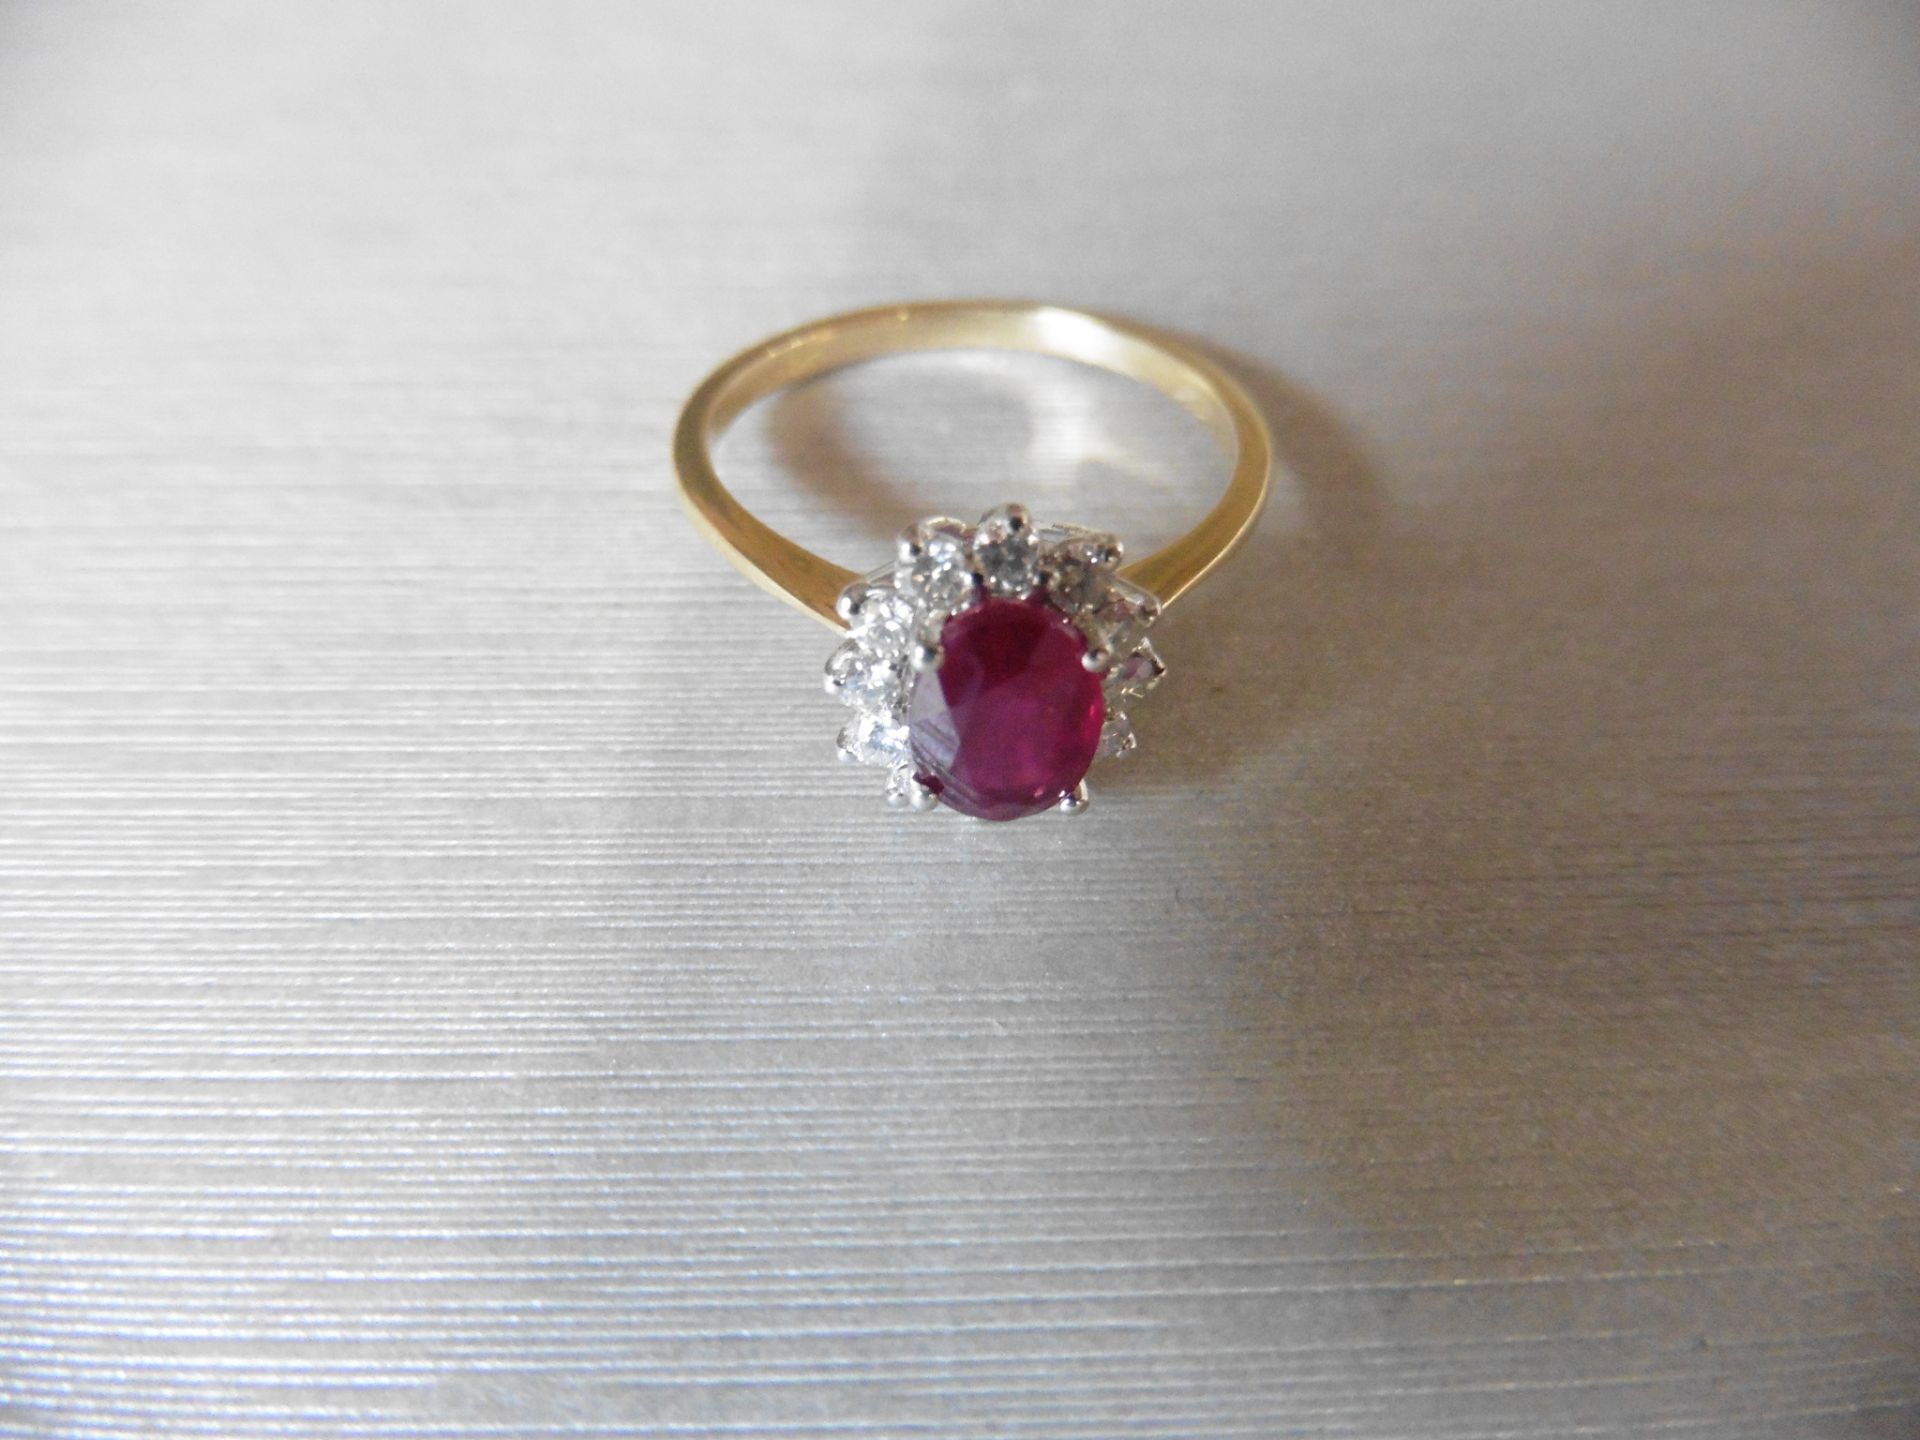 0.75Ct / 0.30Ct Ruby And Diamond Cluster Ring. - Image 3 of 3